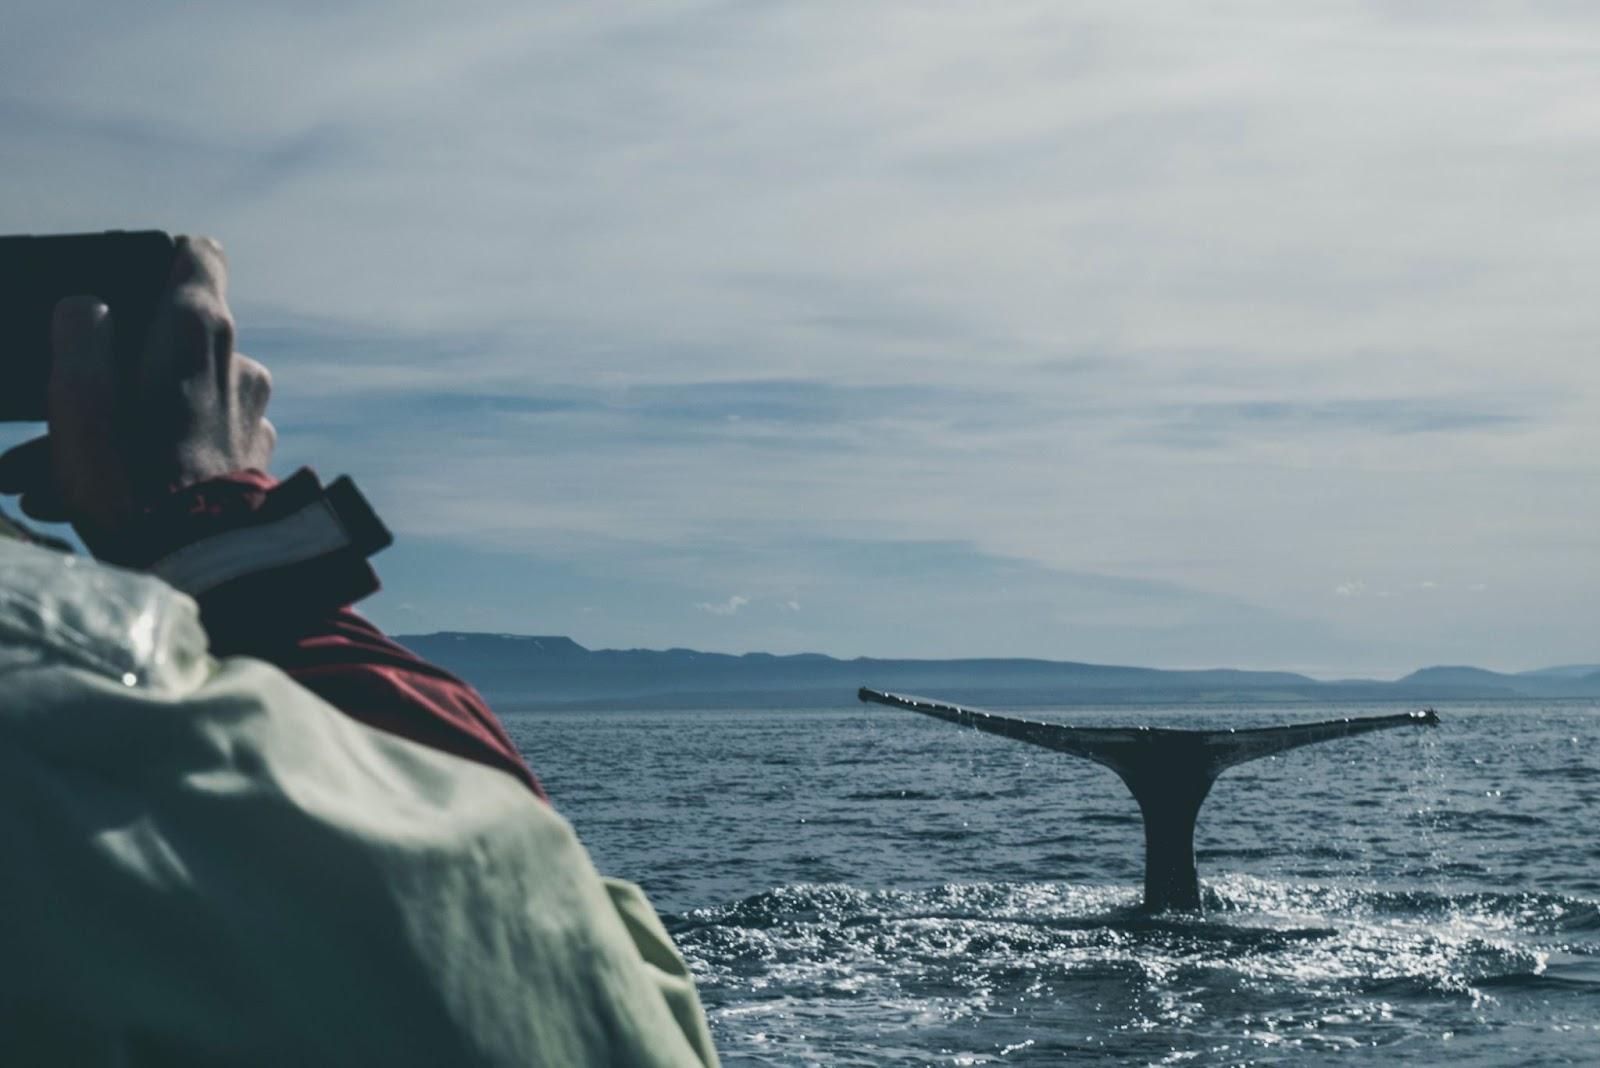 A person taking a picture of a Whale's tail at sea